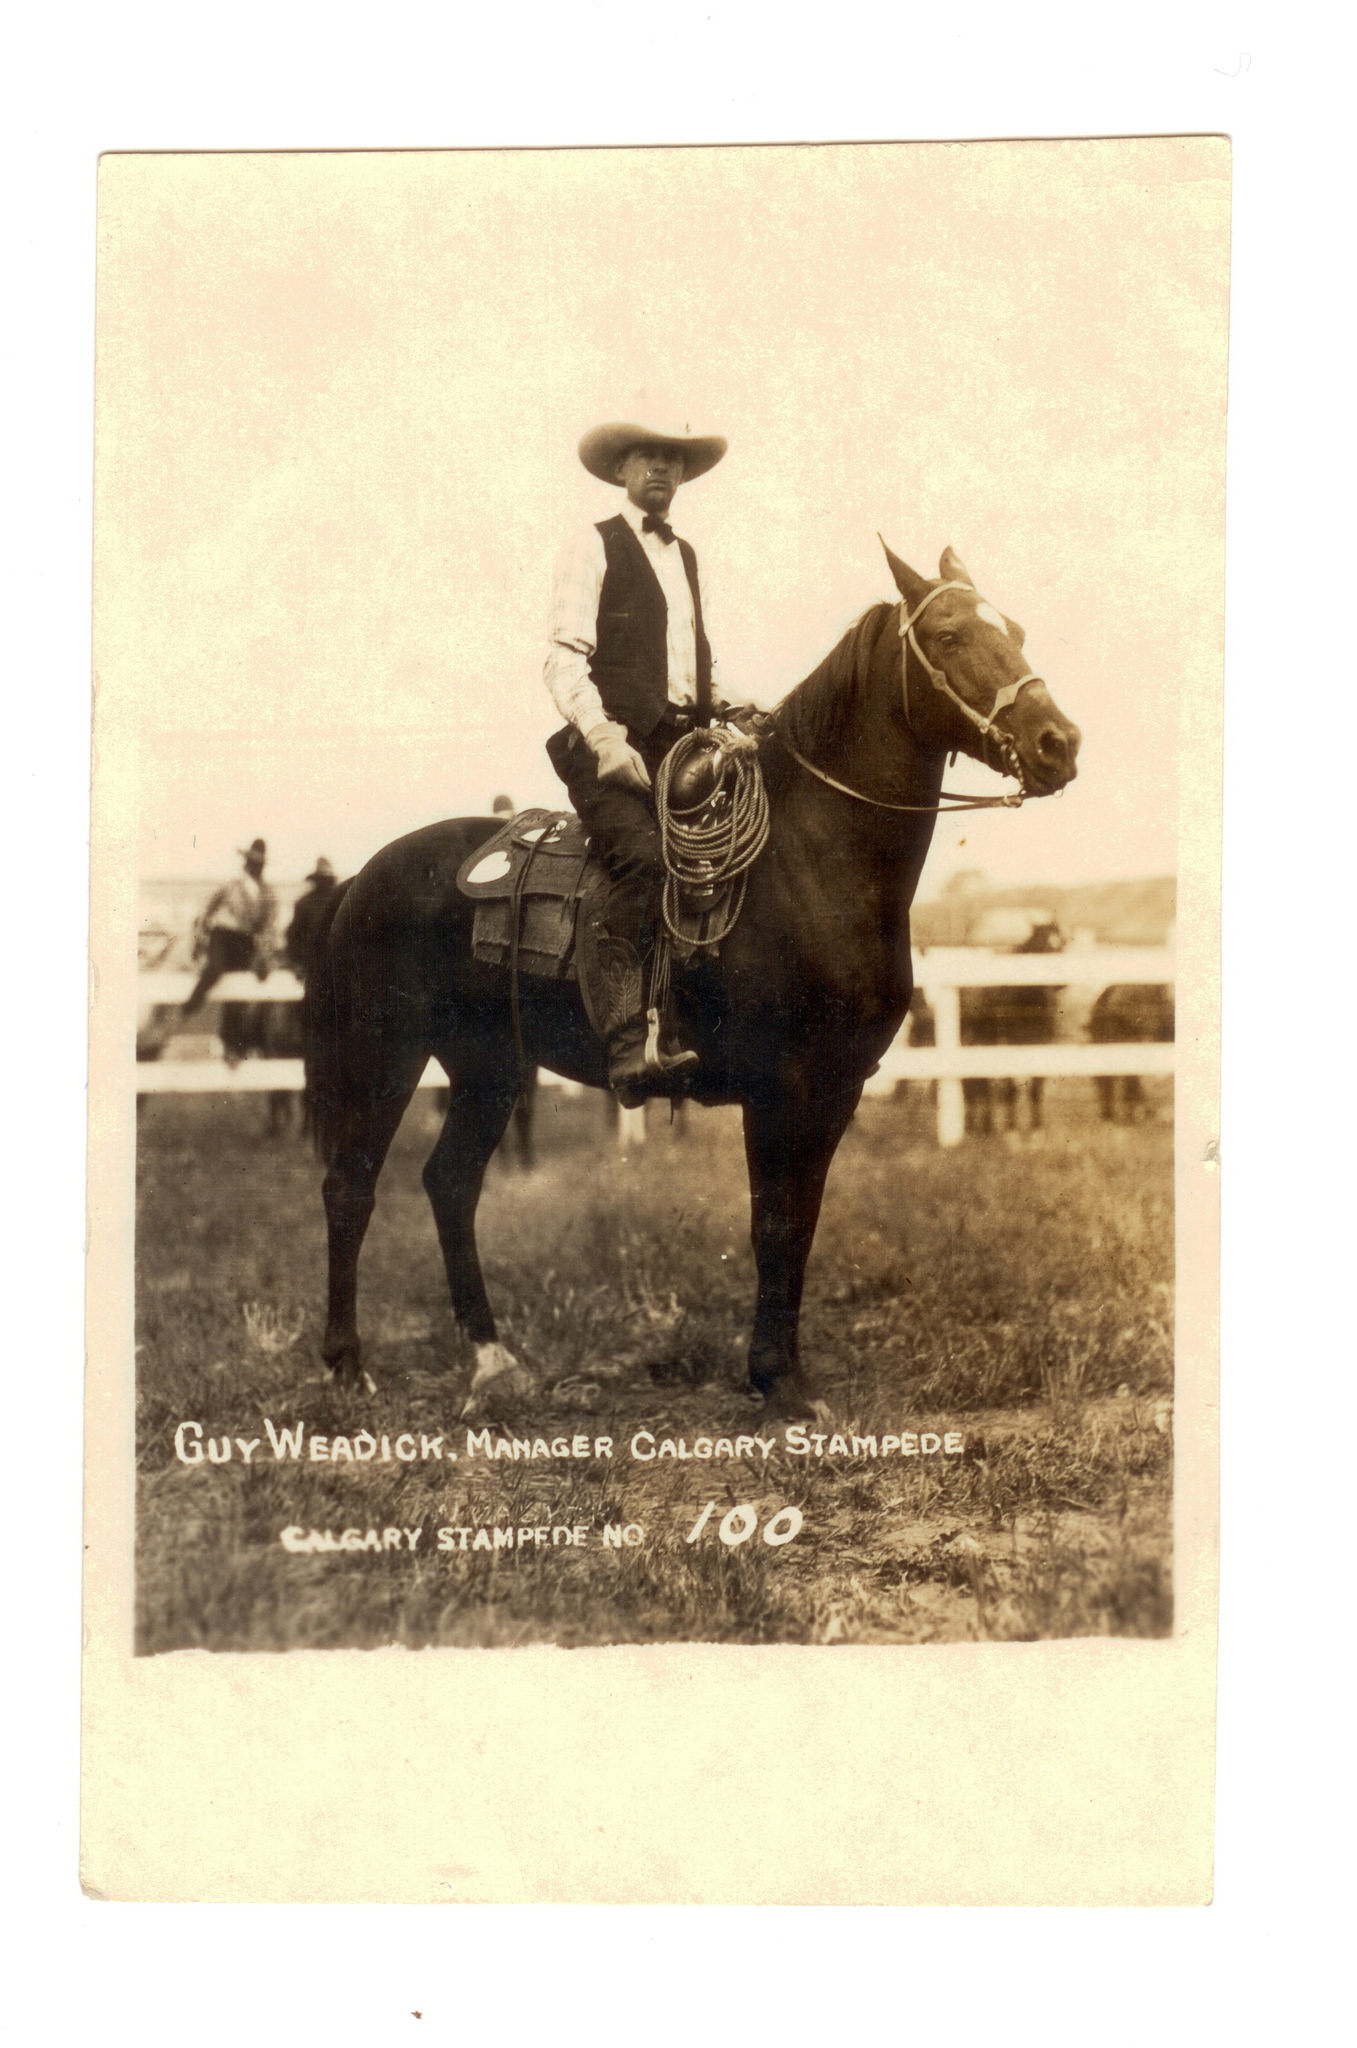 Guy Weadick was inspired by Canada's Western Frontier.